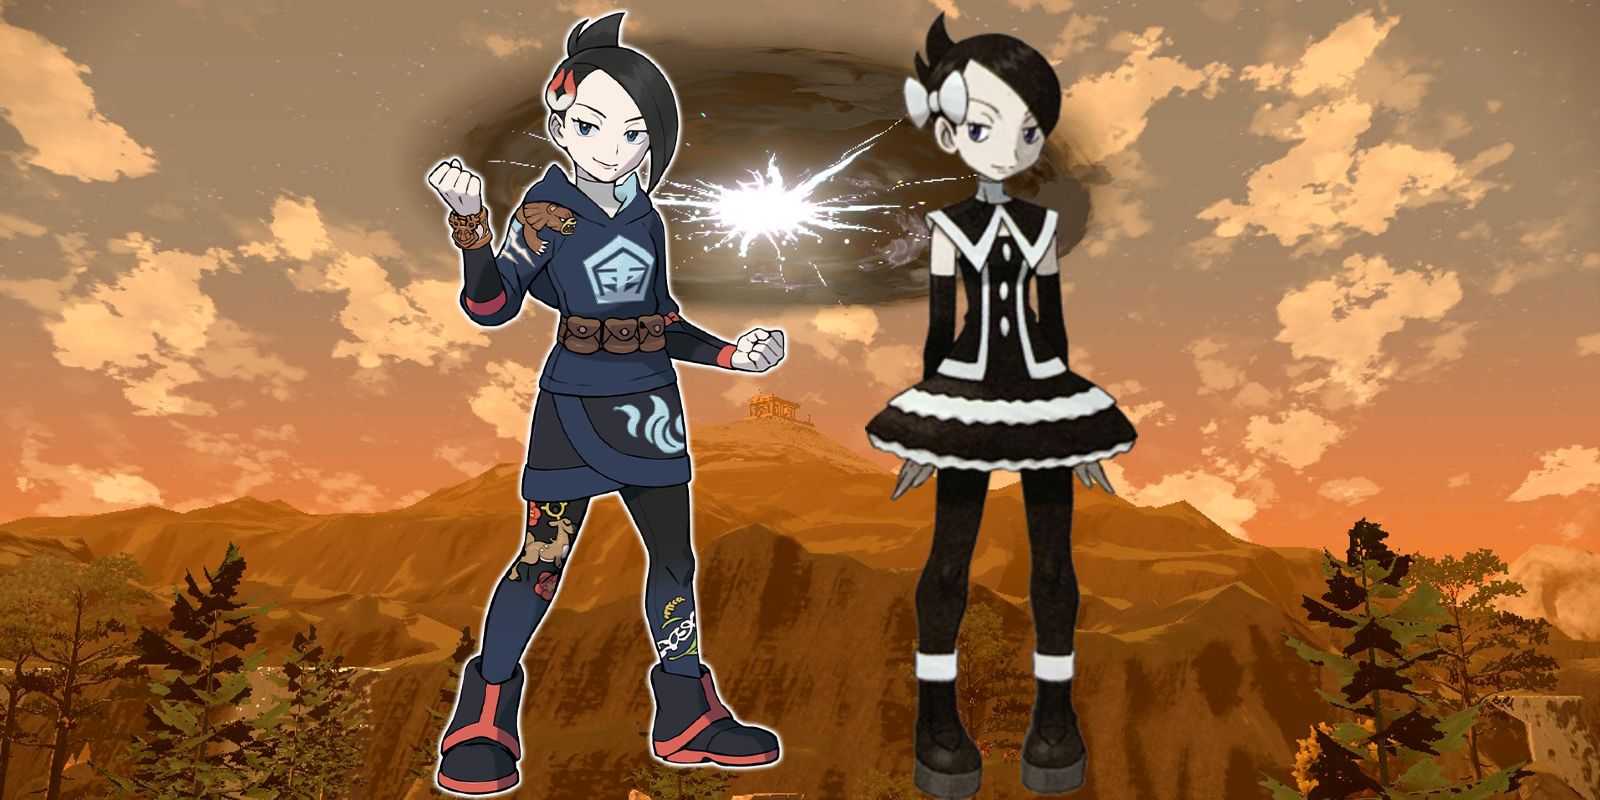 Mai, Marley's ancestor in Pokemon Legends: Arceus, next to Marley from BDSP